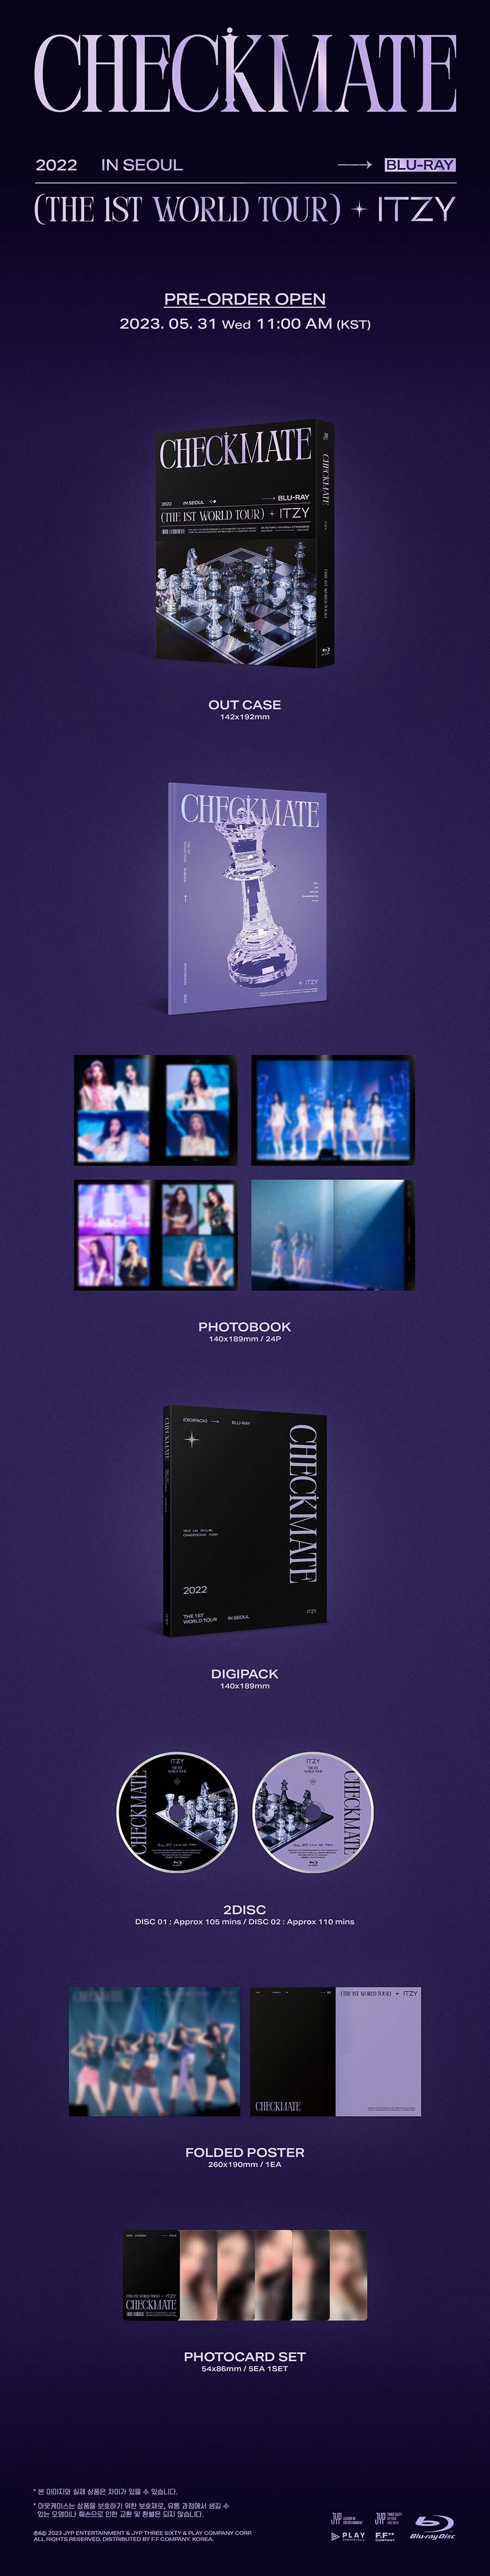 (Blu ray ) 2022 ITZY THE 1ST WORLD TOUR CHECKMATE in SEOUL (+POB) ITZY ITZY2022 ITZYcheckmate ITZYseoul ITZYdvd ITZYblueray